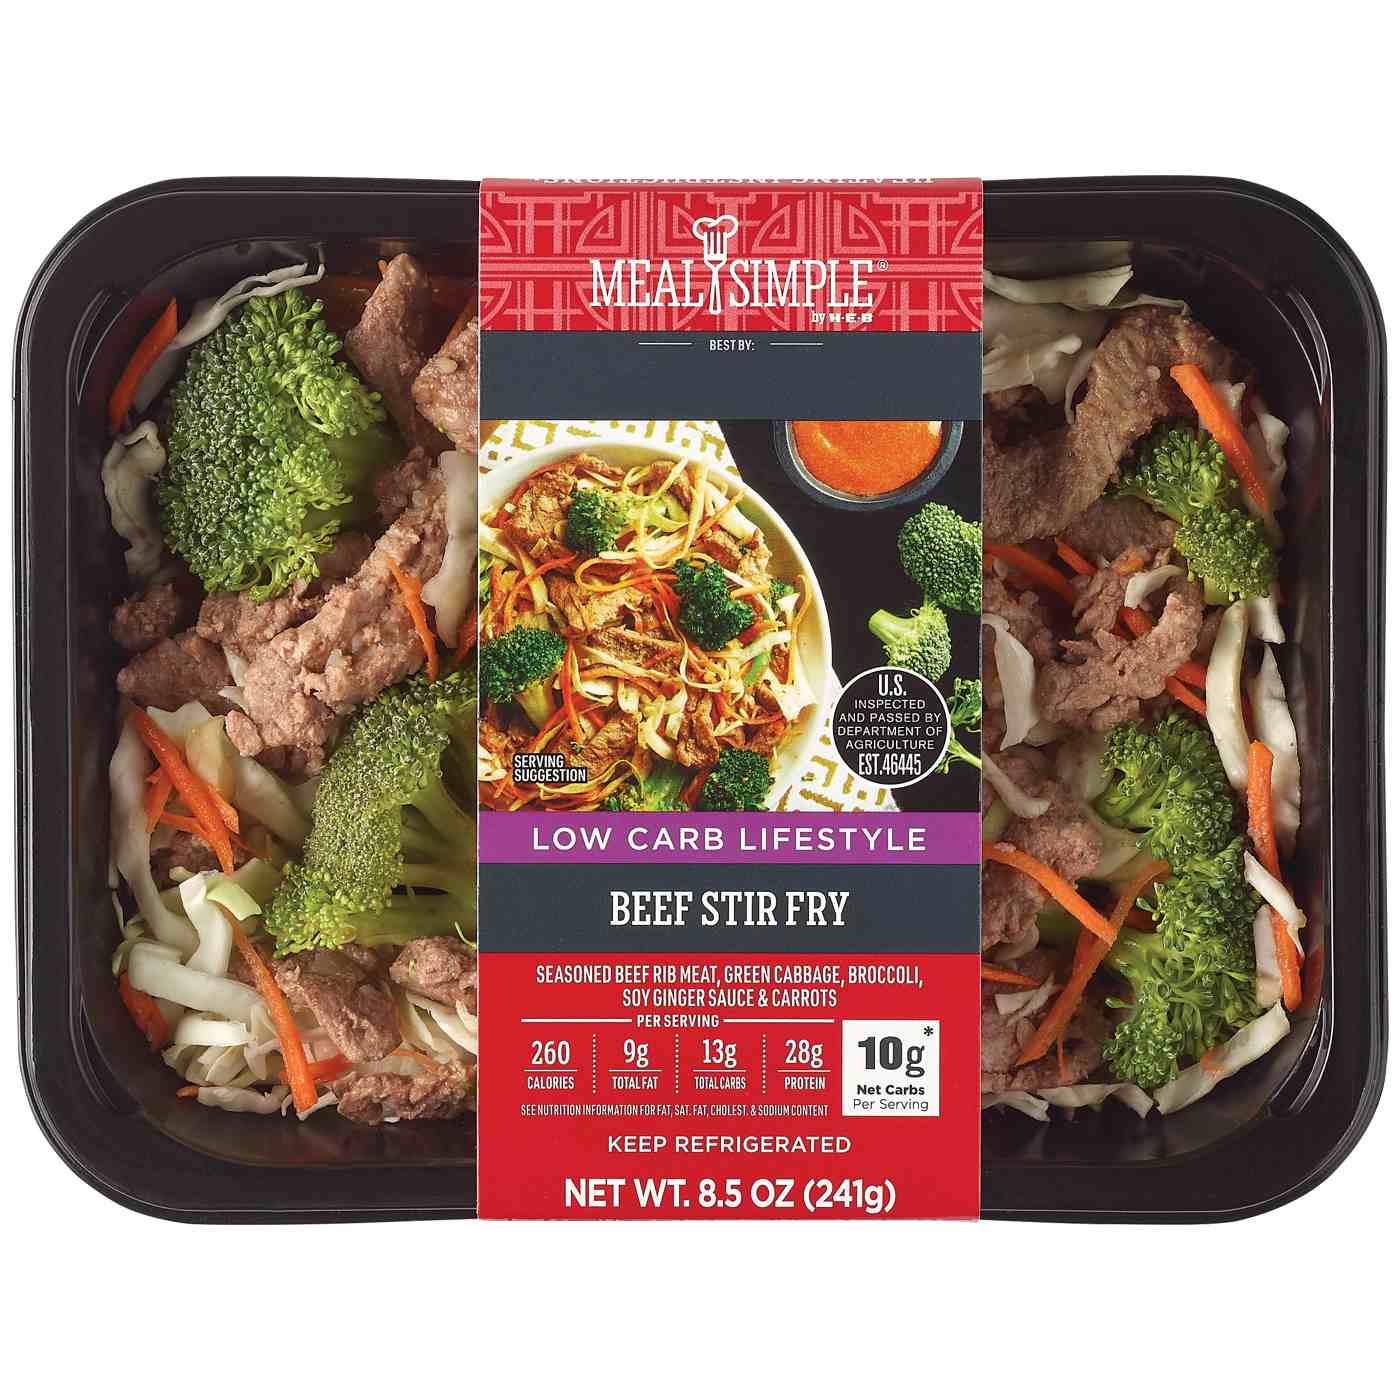 Meal Simple by H-E-B Beef Stir Fry; image 2 of 4